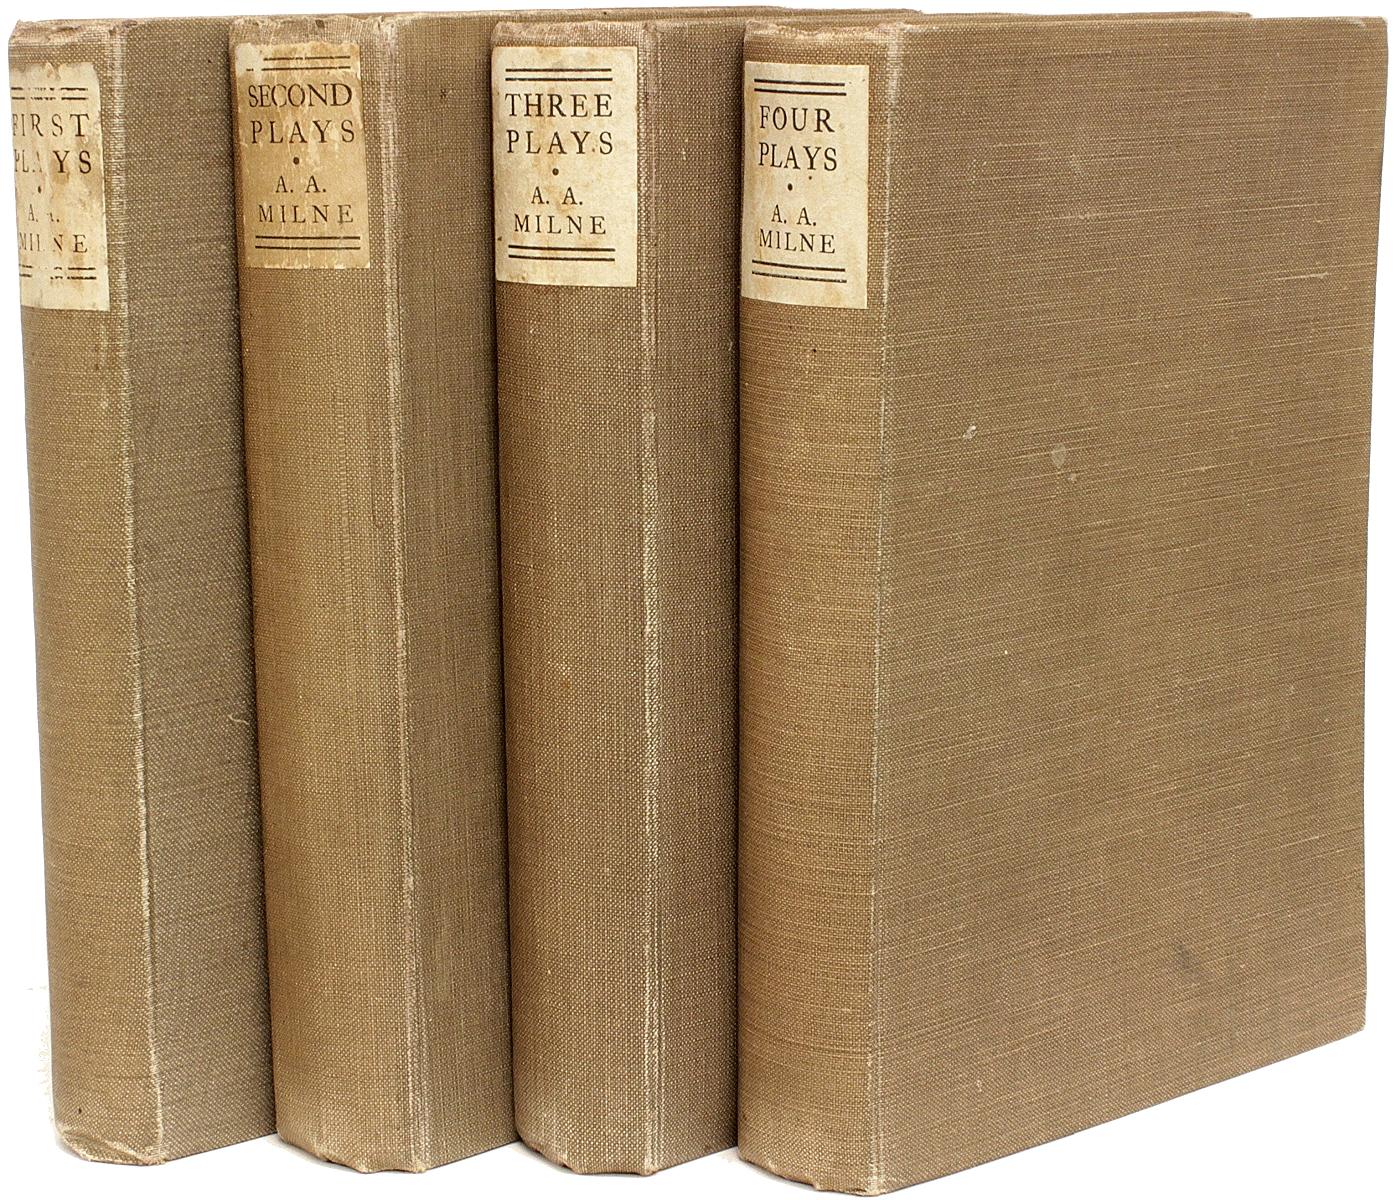 Author: Milne. A. A.. 

Title: [Collected Plays], First Plays; Second Plays; Three Plays; and Four Plays.

Publisher: London: Chatto & Windus, 1919, 21, 23, 26.

Description: all first editions each inscribed to his brother. 4 vols., each